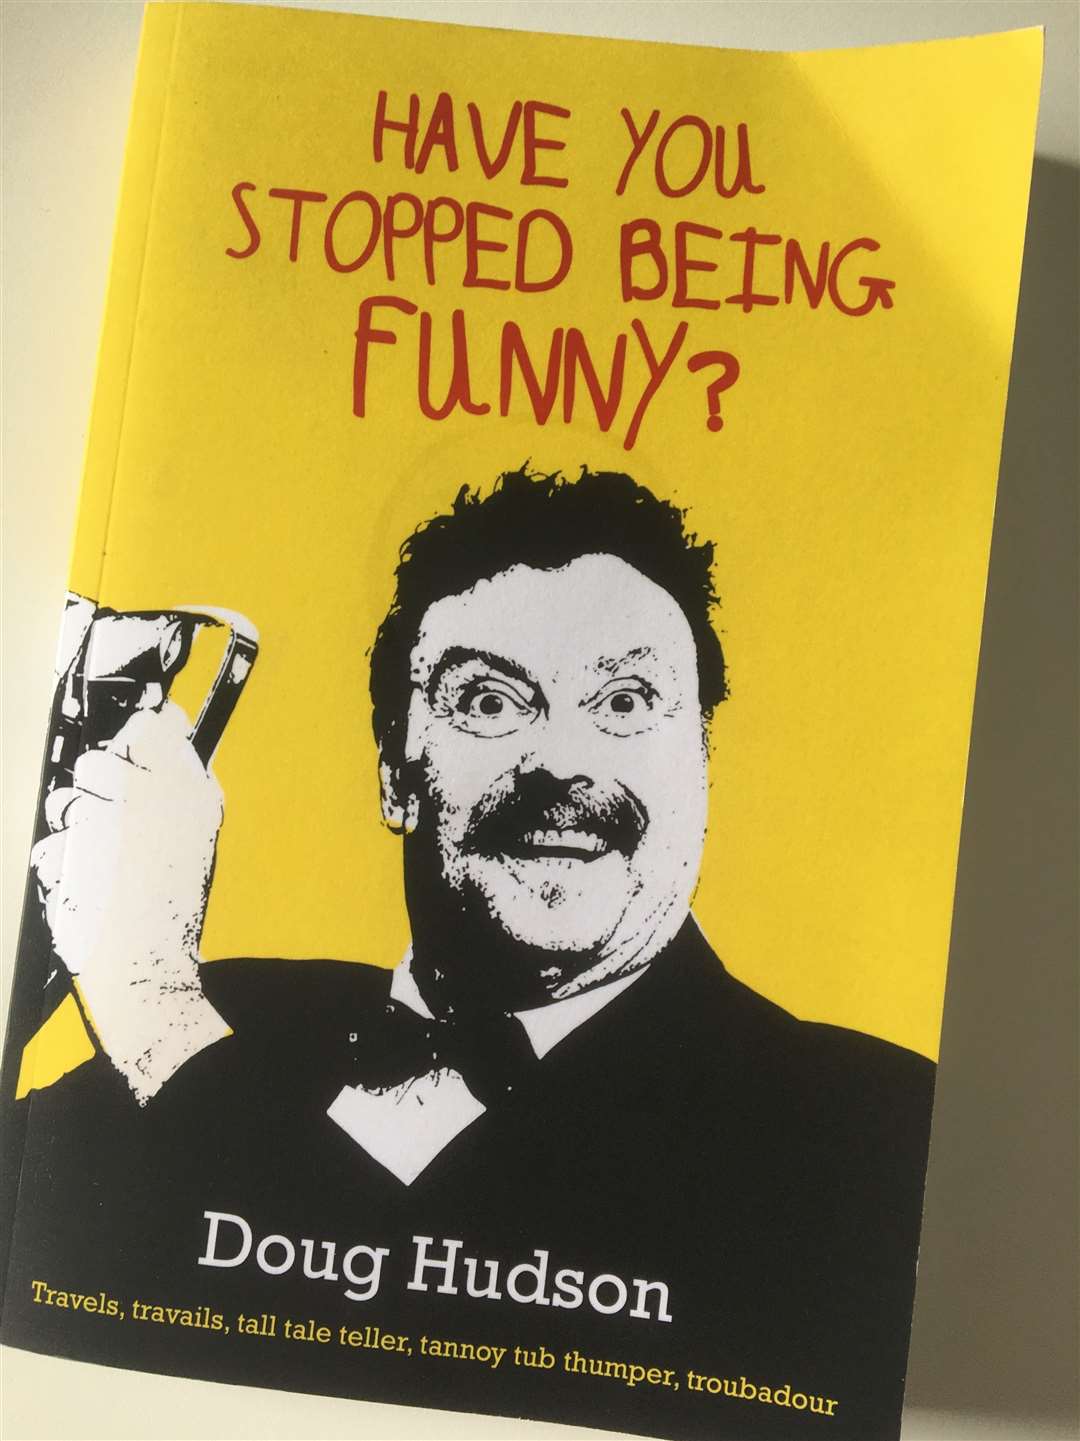 Doug Hudson's book Have You Stopped Being Funny?